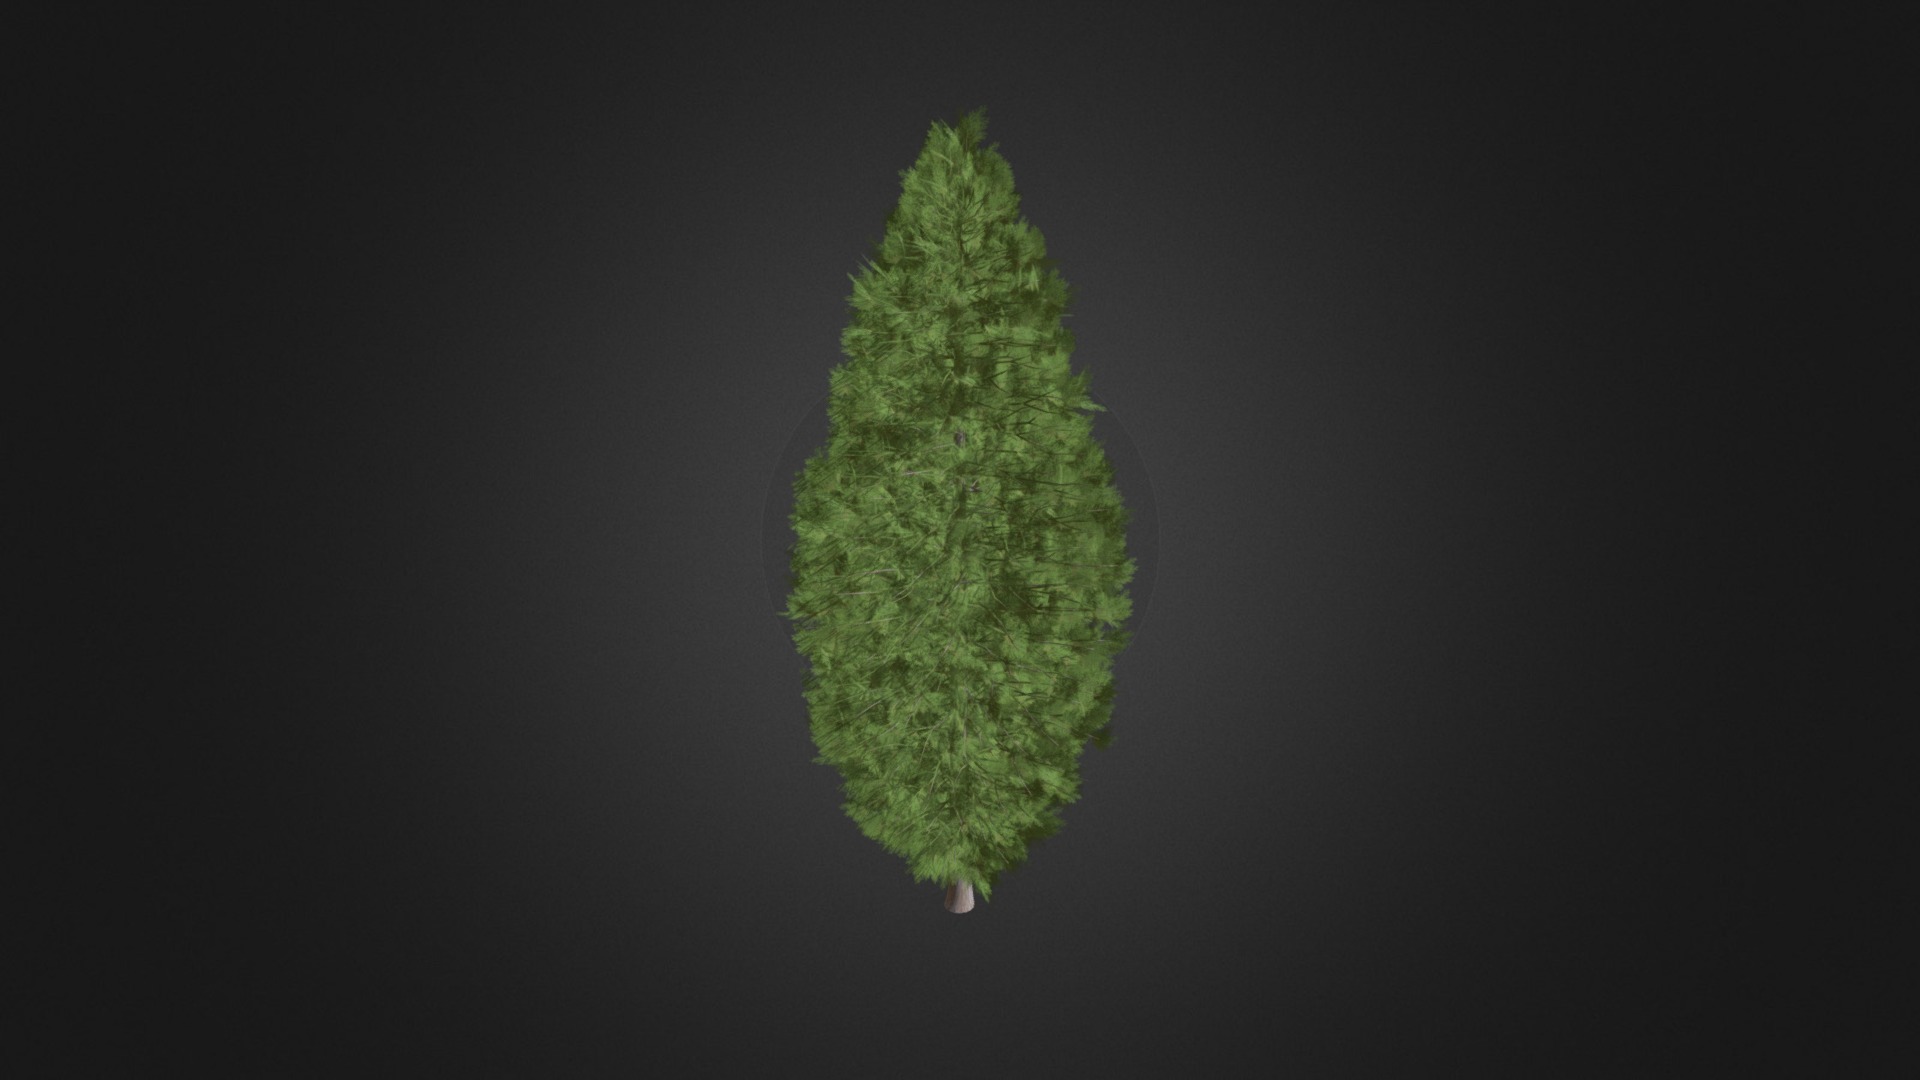 3D model White Cedar (Thuja occidentalis) 3.4m - This is a 3D model of the White Cedar (Thuja occidentalis) 3.4m. The 3D model is about a green leaf on a black background.